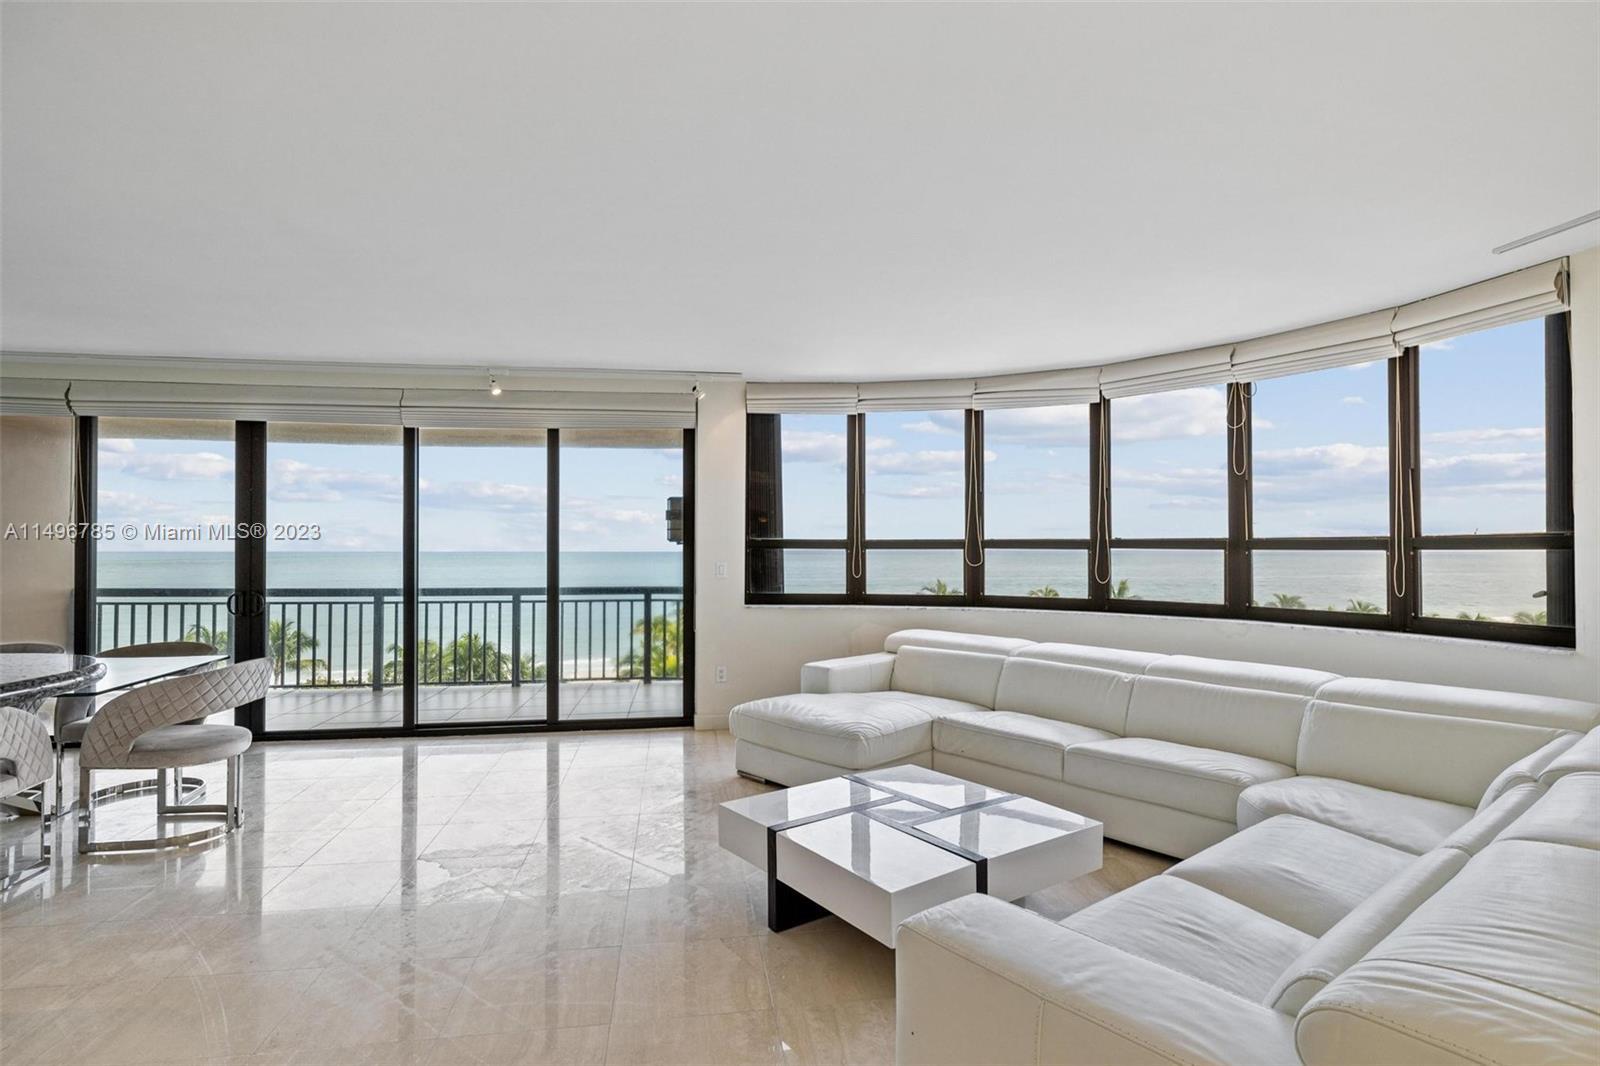 SOUTHEAST CORNER IN BAL HARBOUR NOW AVAILABLE! Large 3 bedroom with 2 ½ baths. Needs TLC. 2 balconie